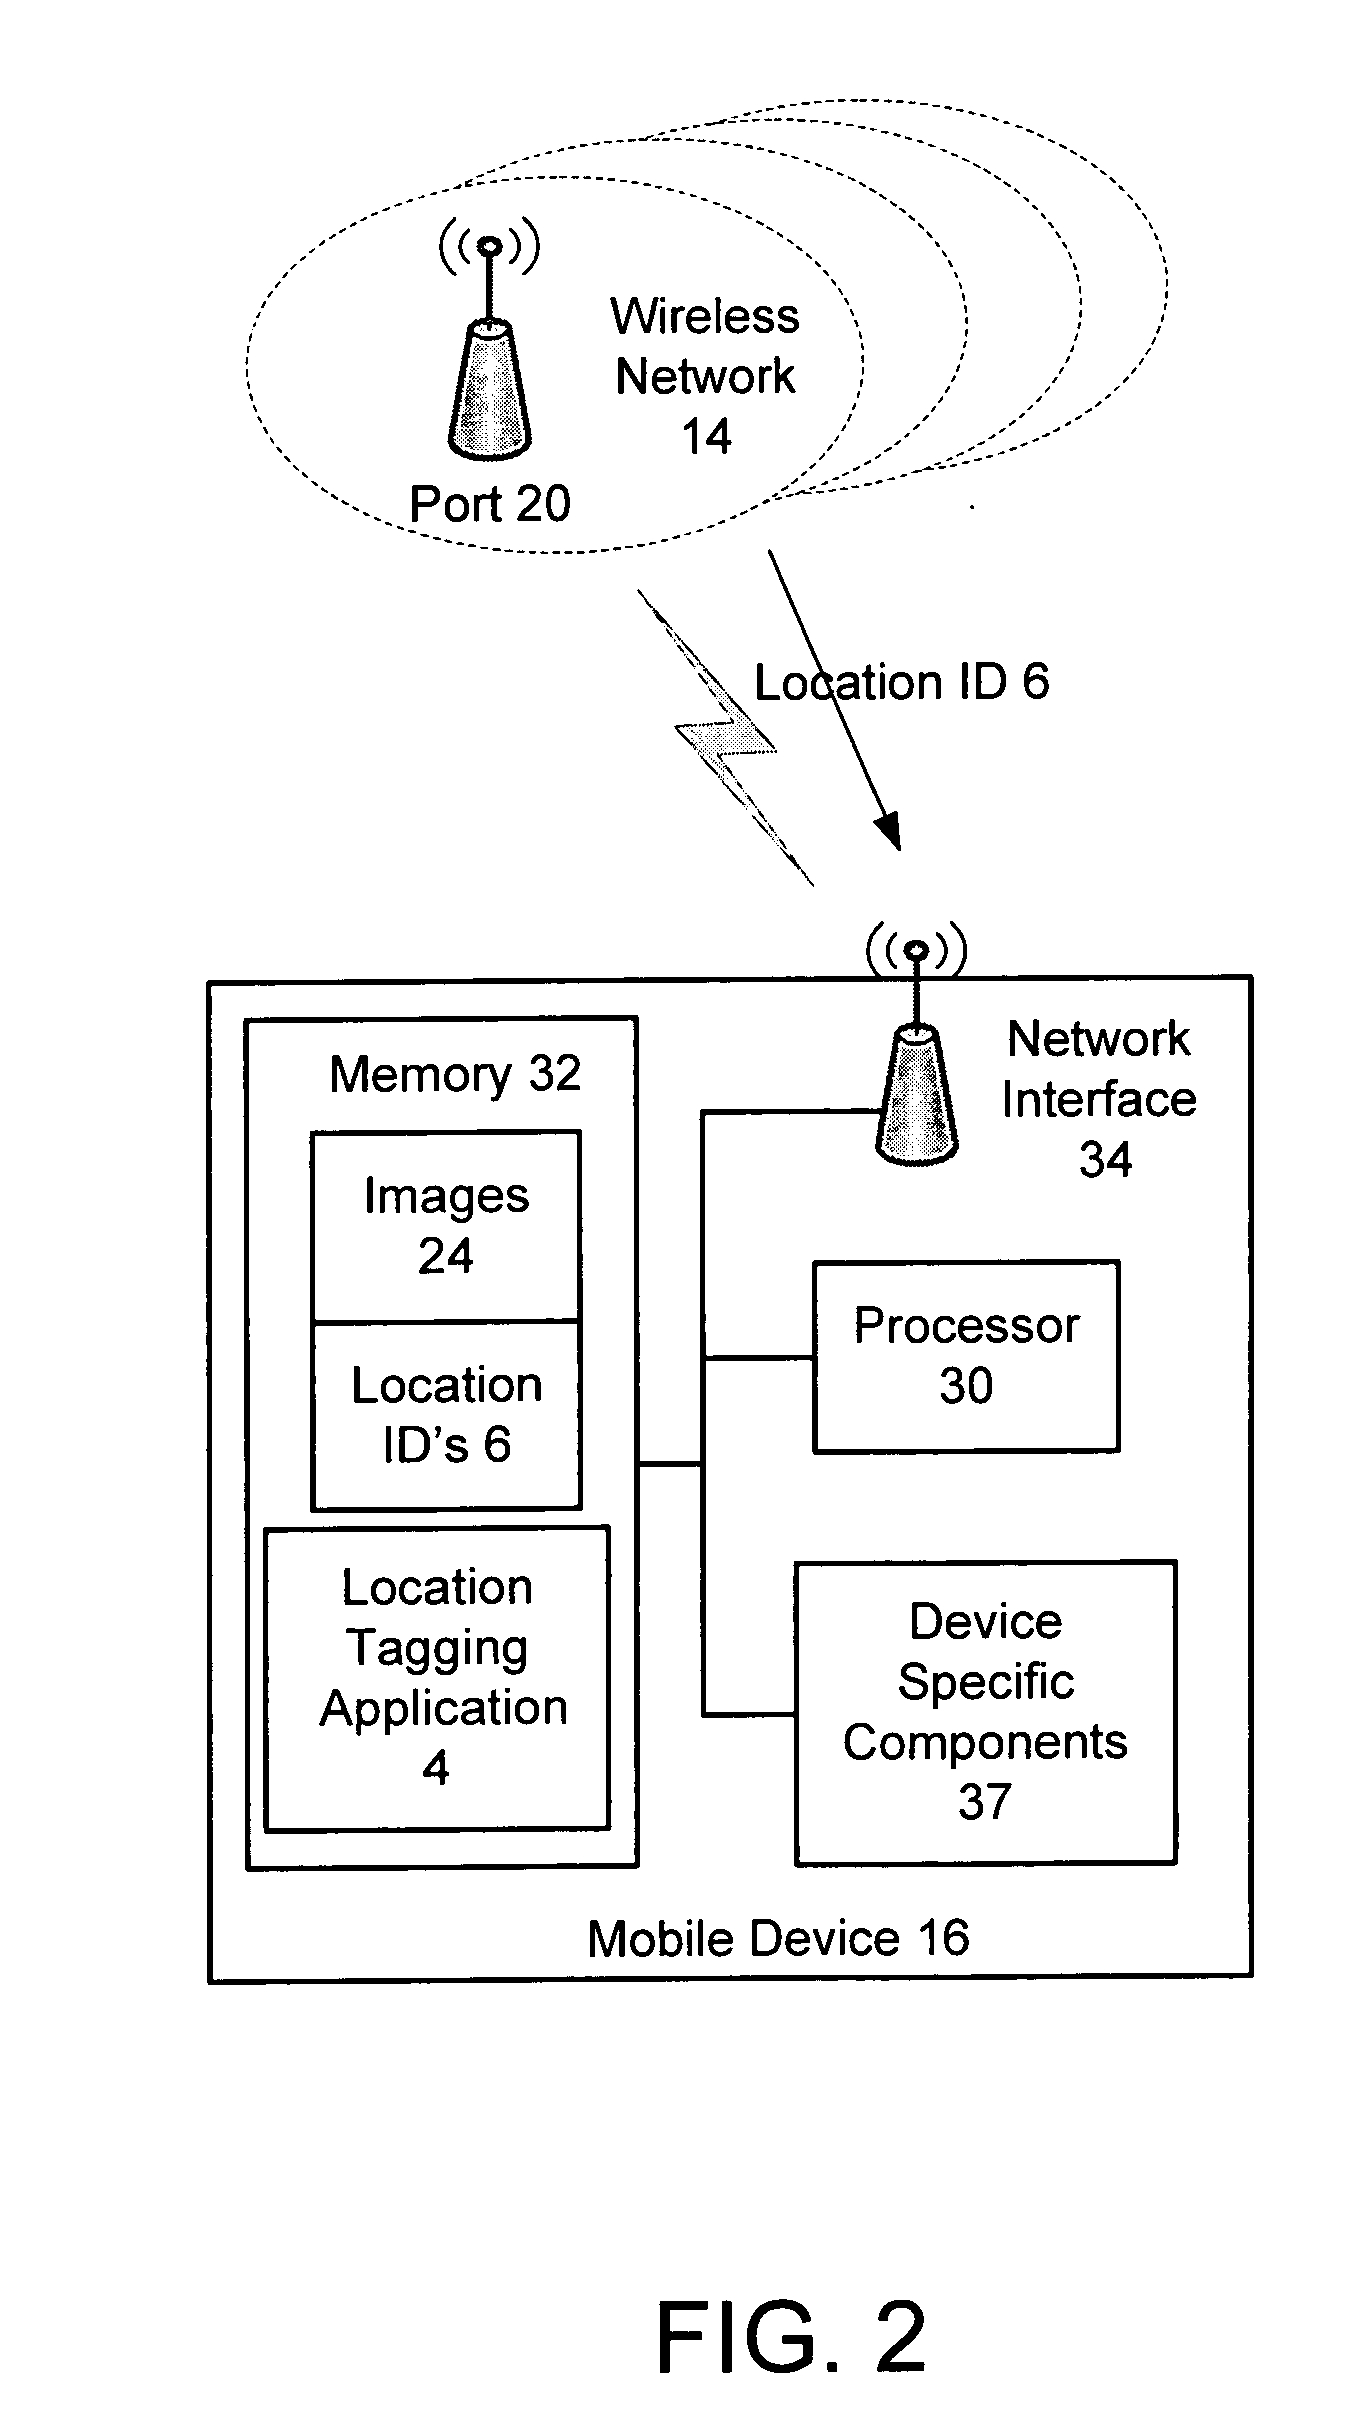 Using local networks for location information and image tagging